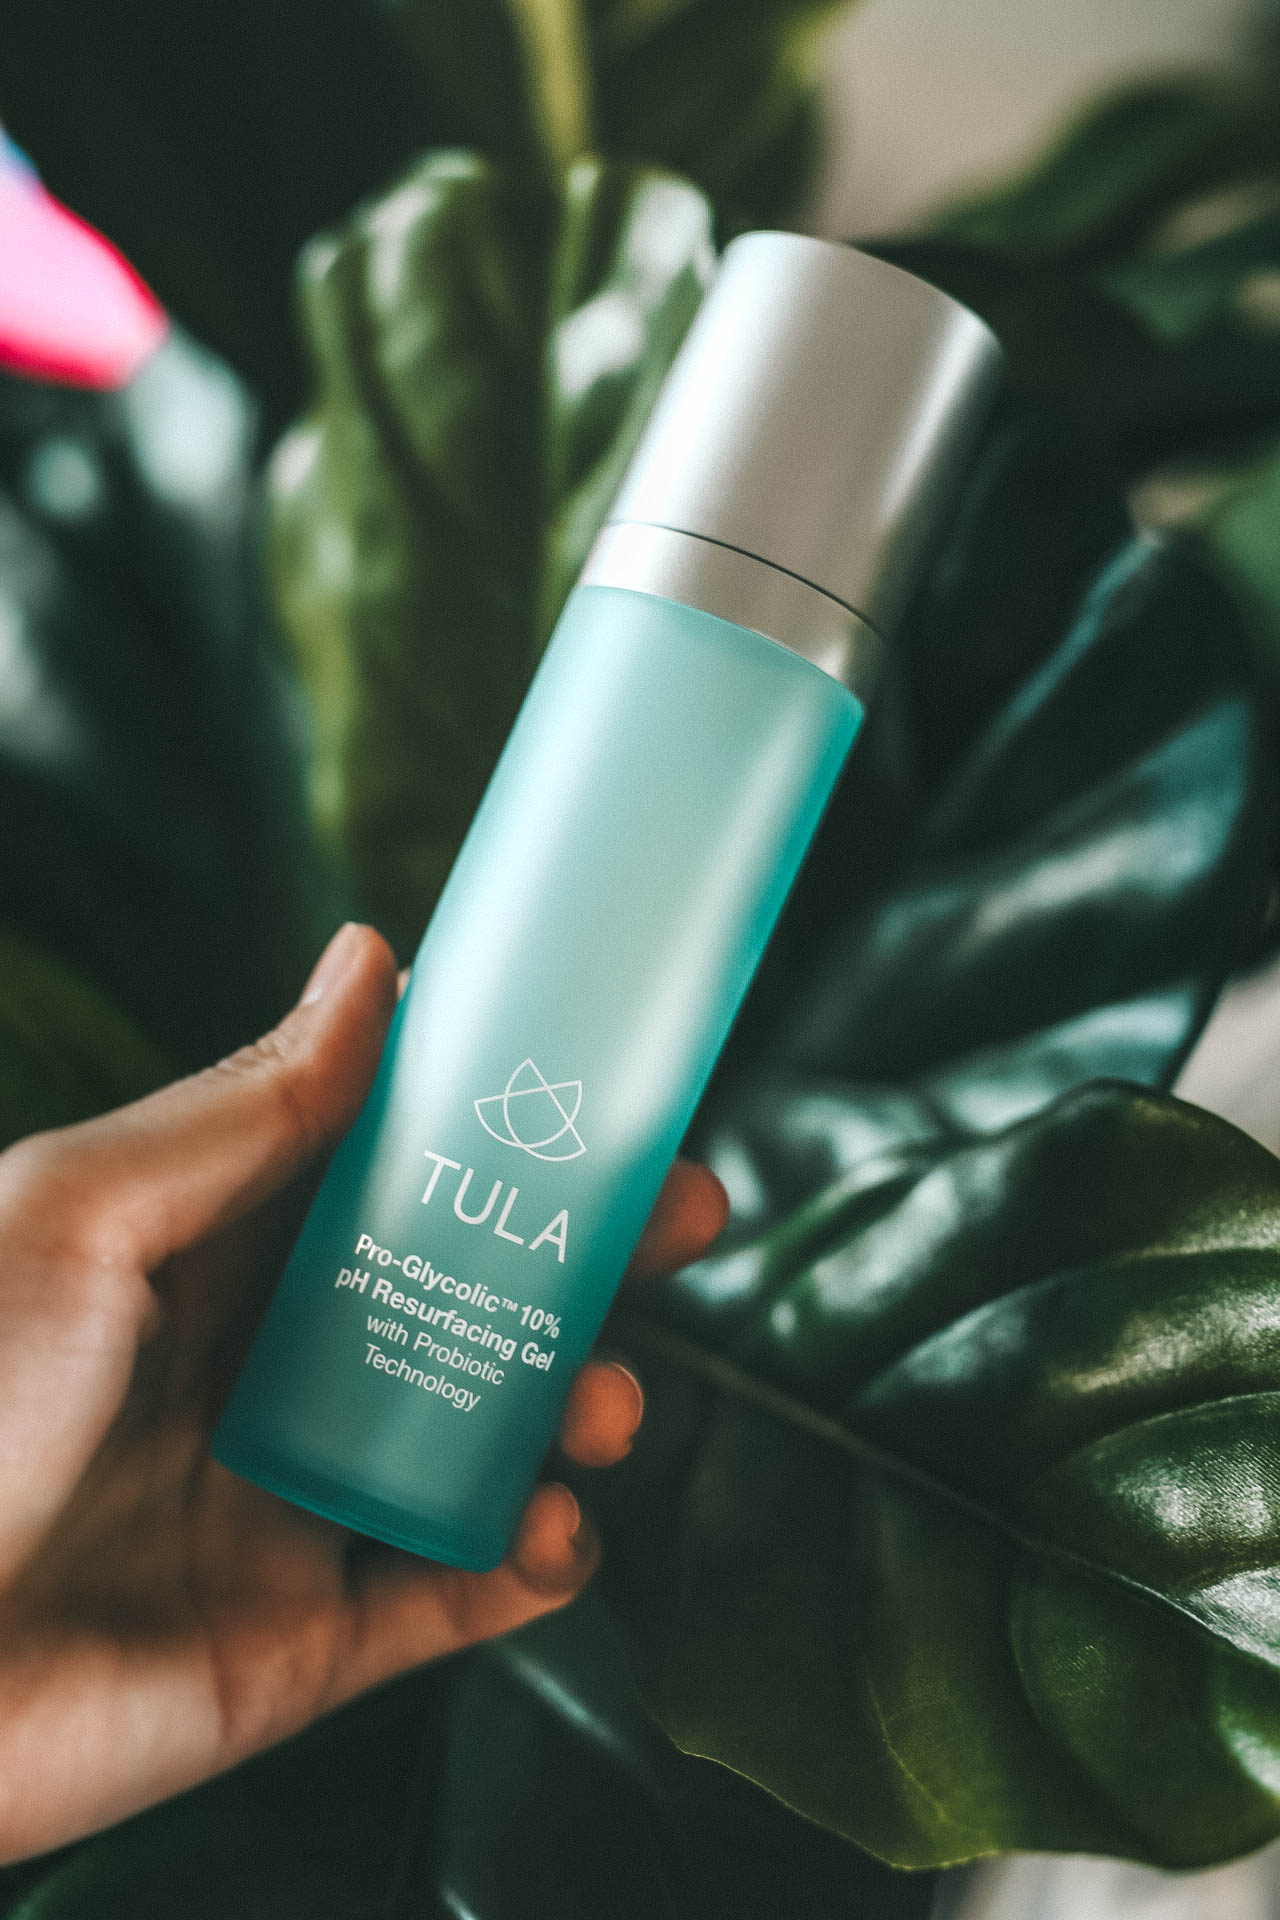 My Must Have Tula Skincare Products | the best skincare products for women || Dressed to Kill #skincare #tula #beauty #womensbeauty #beautyproducts #dtkaustin - My Must Have Tula Skincare Products and 20% off coupon code featured by popular Austin beauty blogger, Dressed to Kill